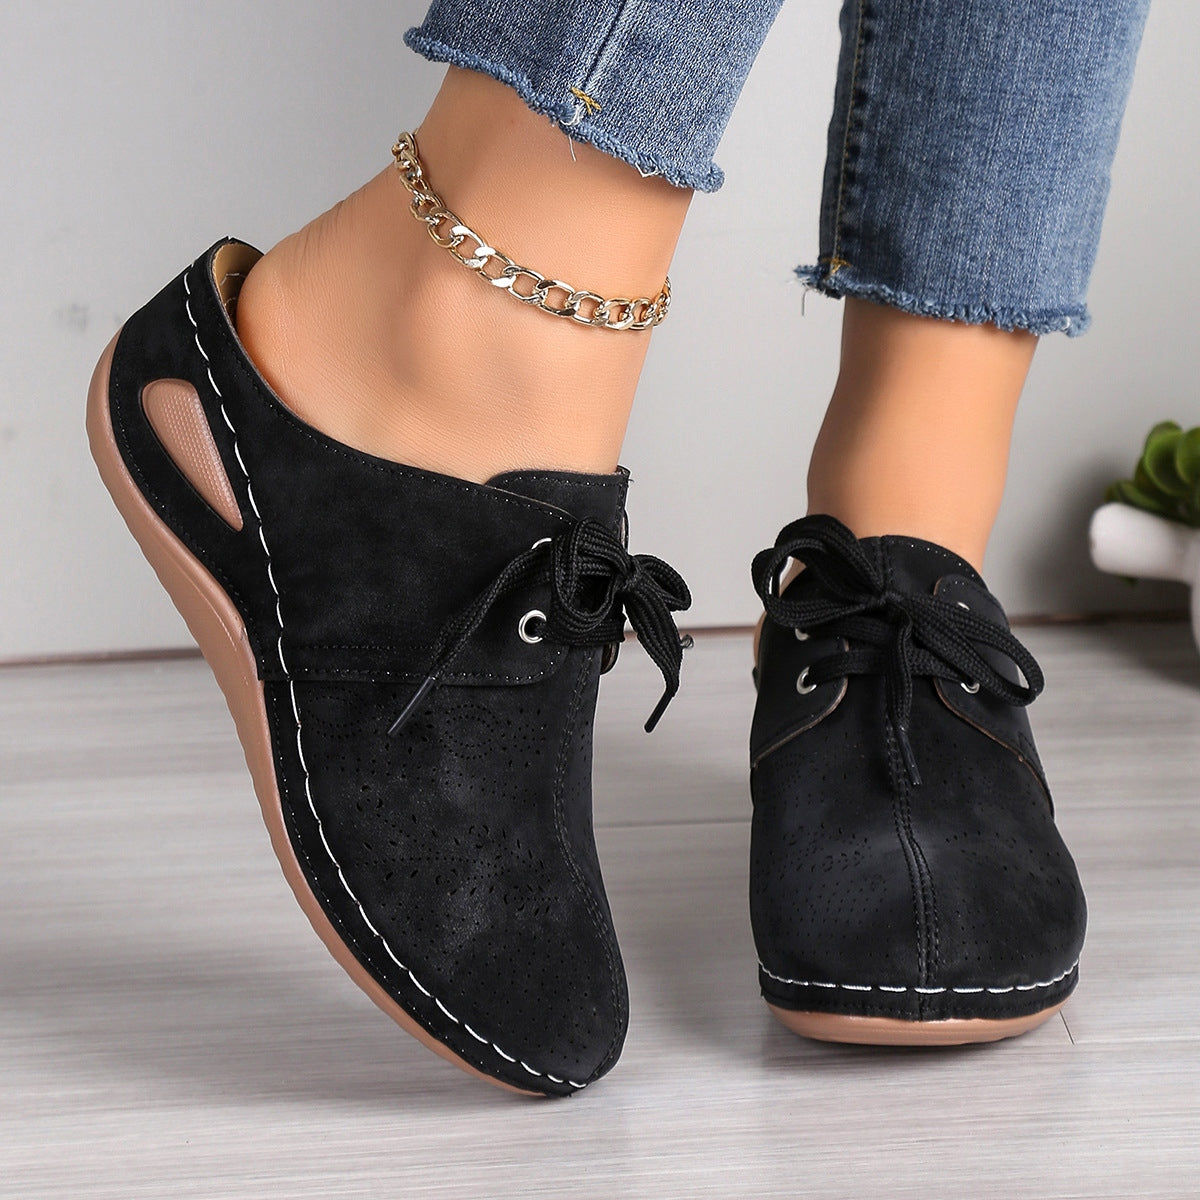 Lace-Up Round Toe Wedge Sandals Black